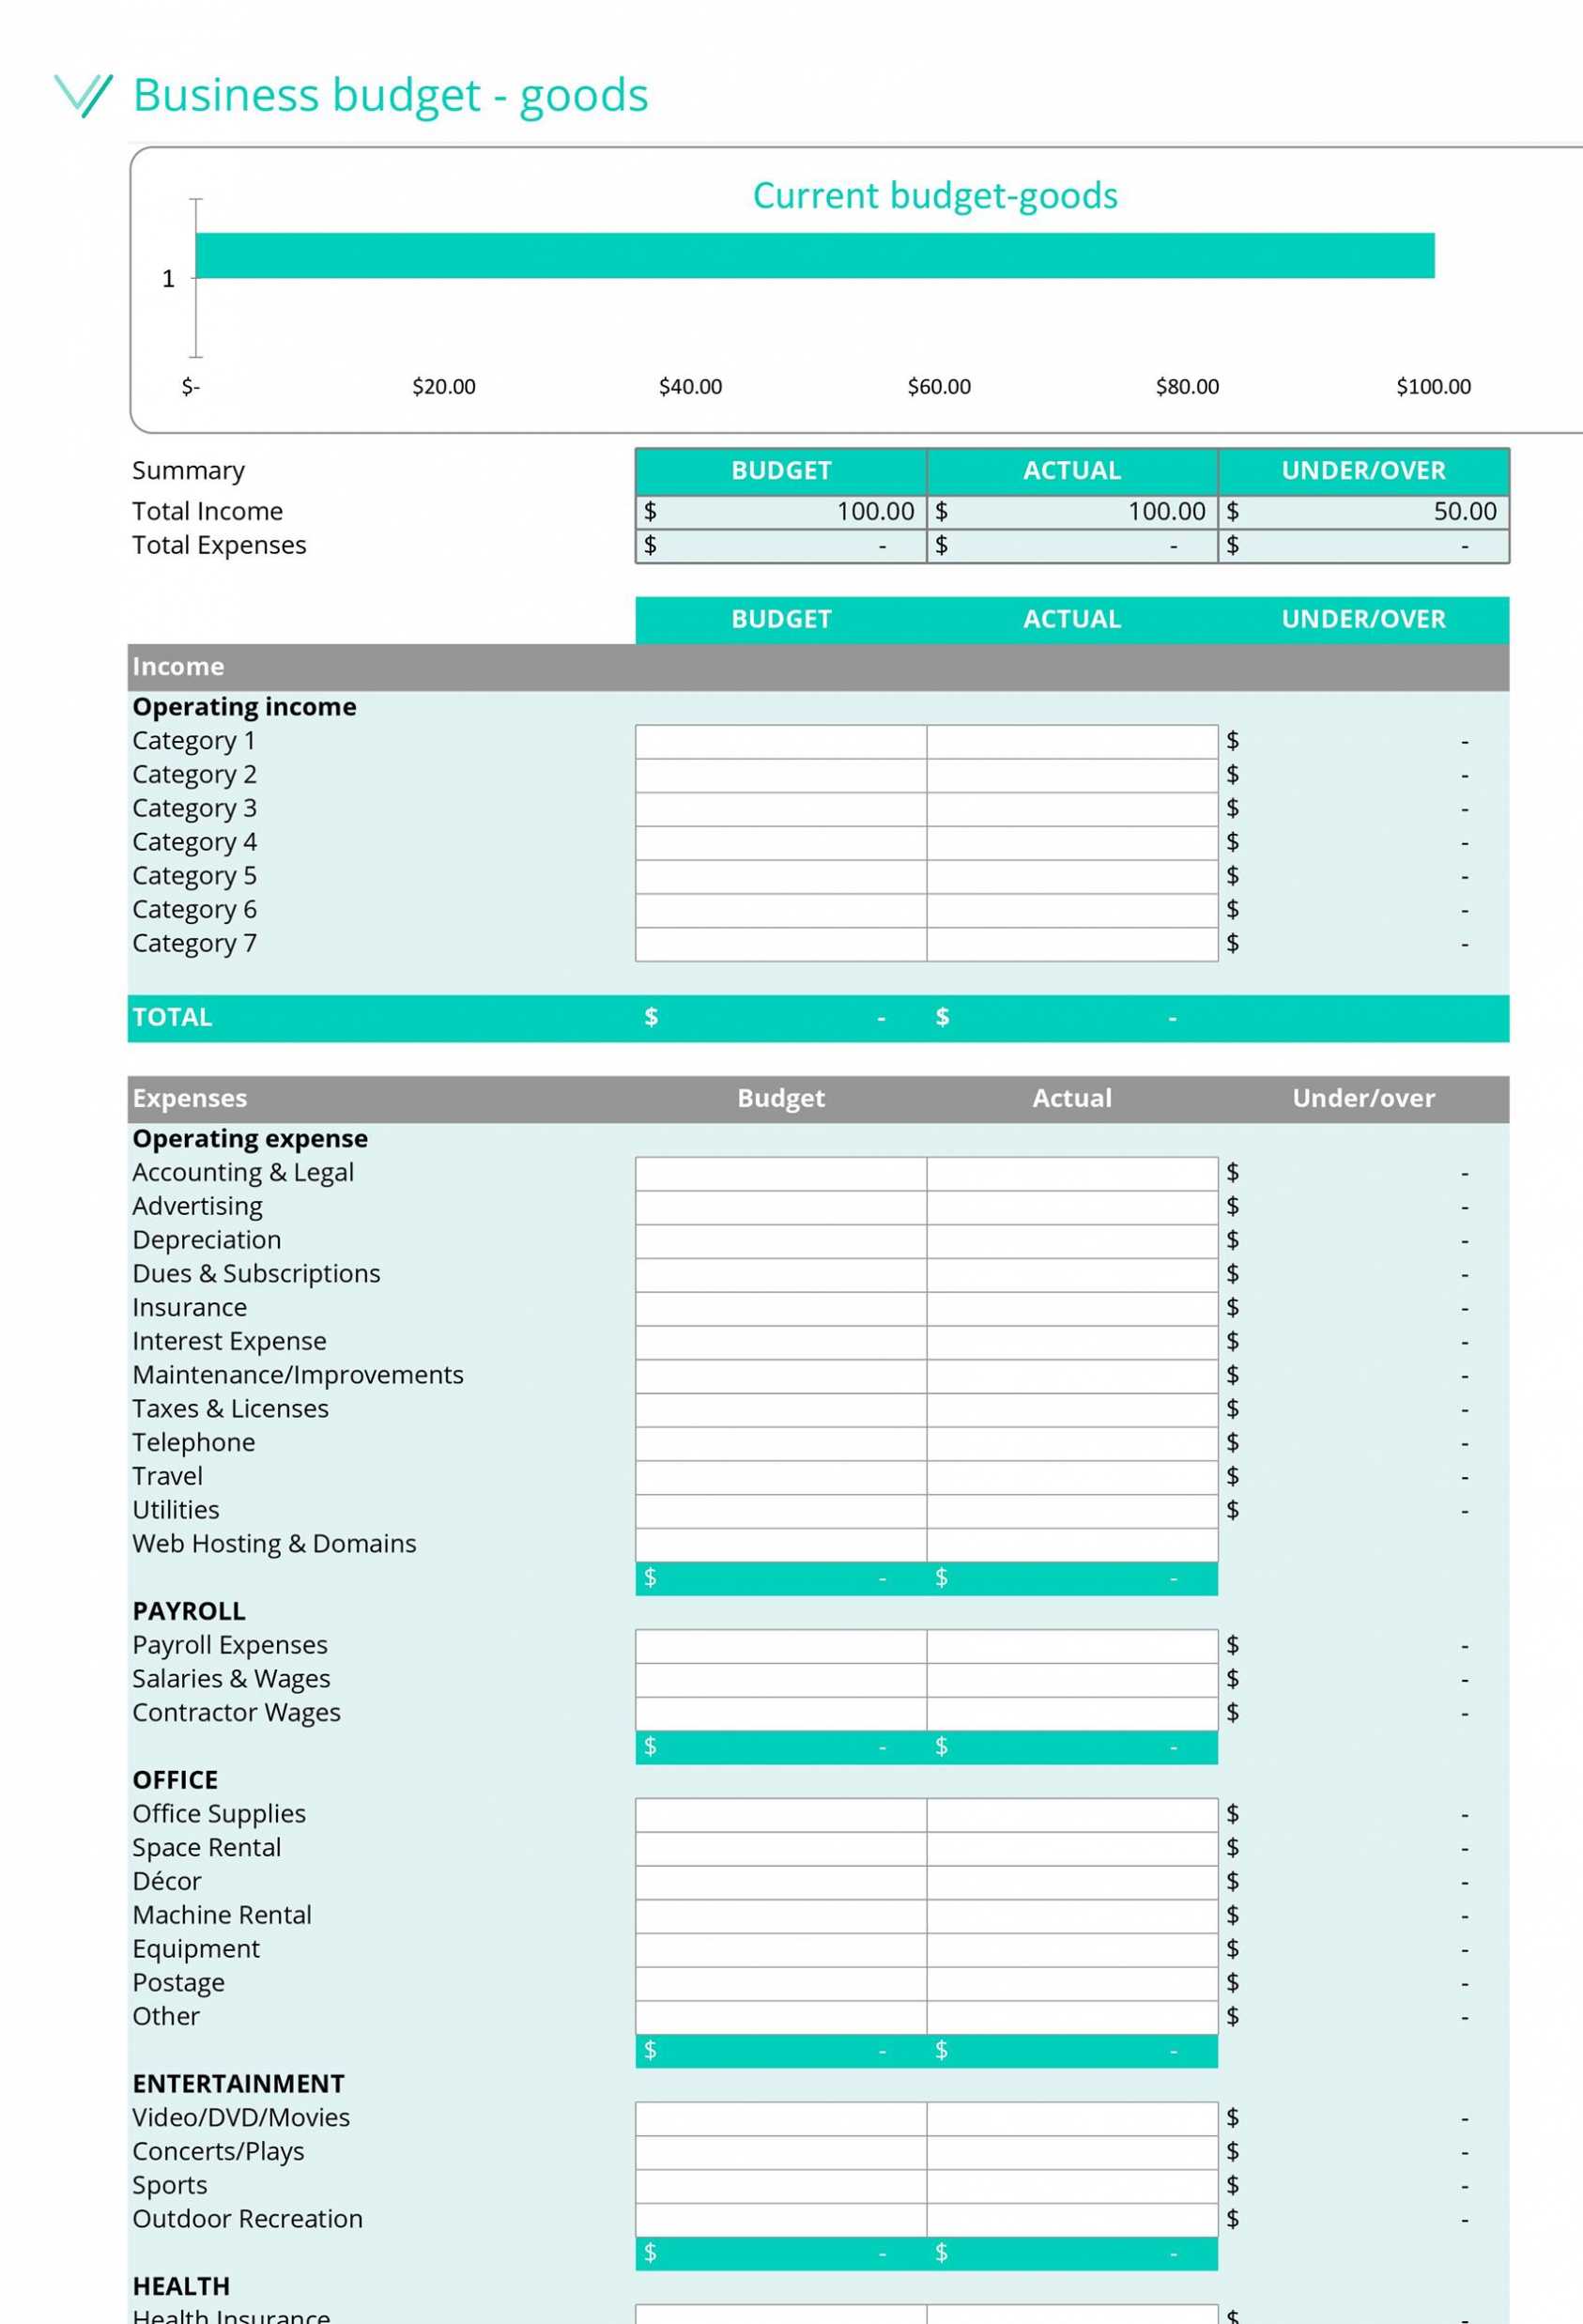 37 Handy Business Budget Templates (Excel, Google Sheets) ᐅ regarding Business Costing Template